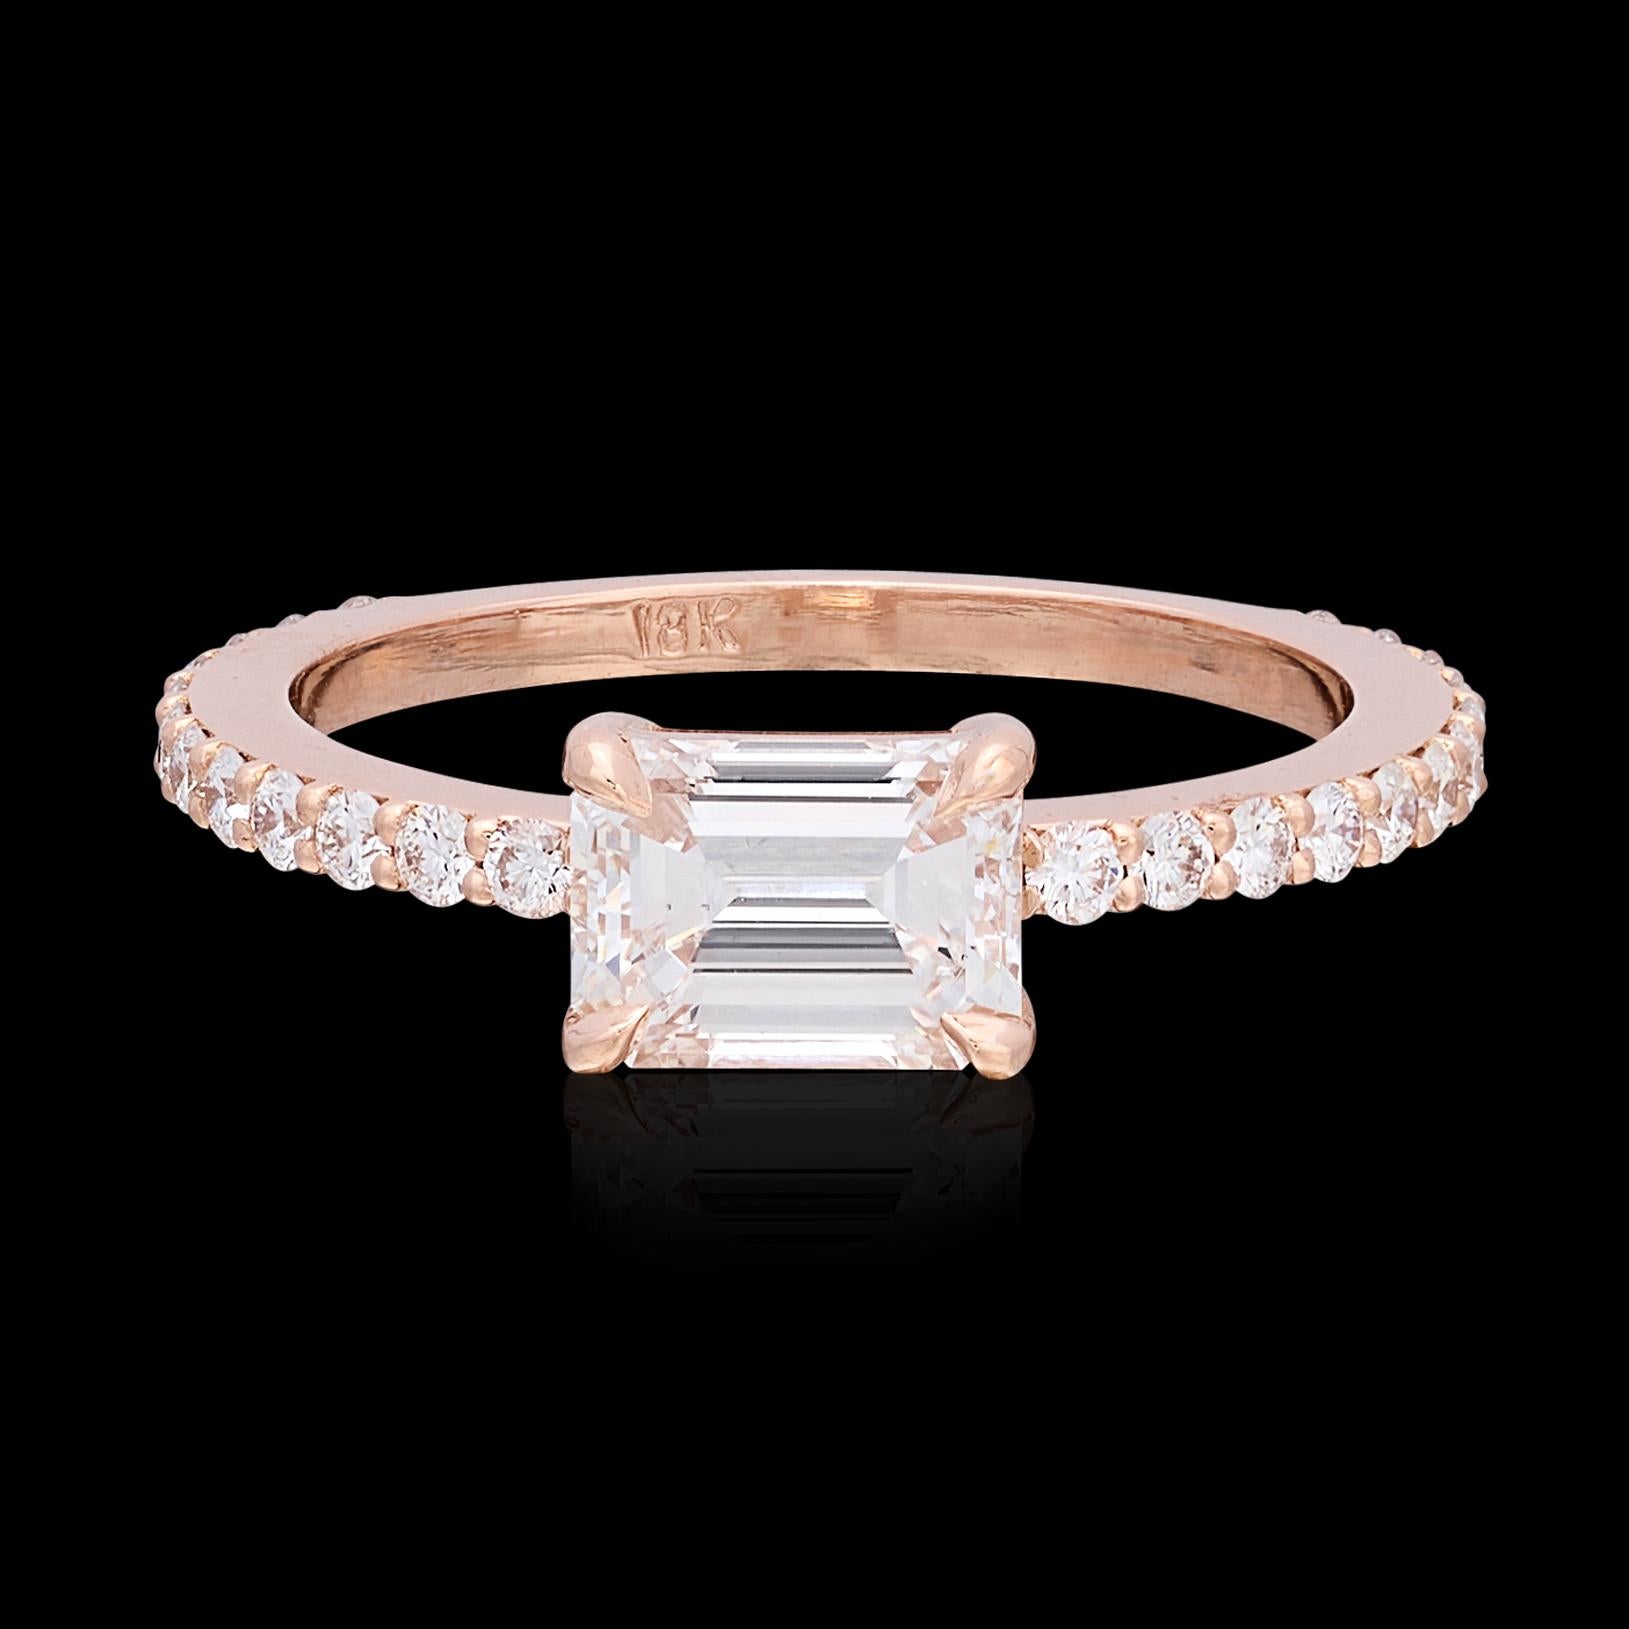 Stand out from the crowd with this truly unique twist on a classic design. This 18 karat rose gold stunner features a spectacular 1.04 carat emerald cut diamond set in an east/west horizontal fashion with an additional 18 diamonds going 3/4 around